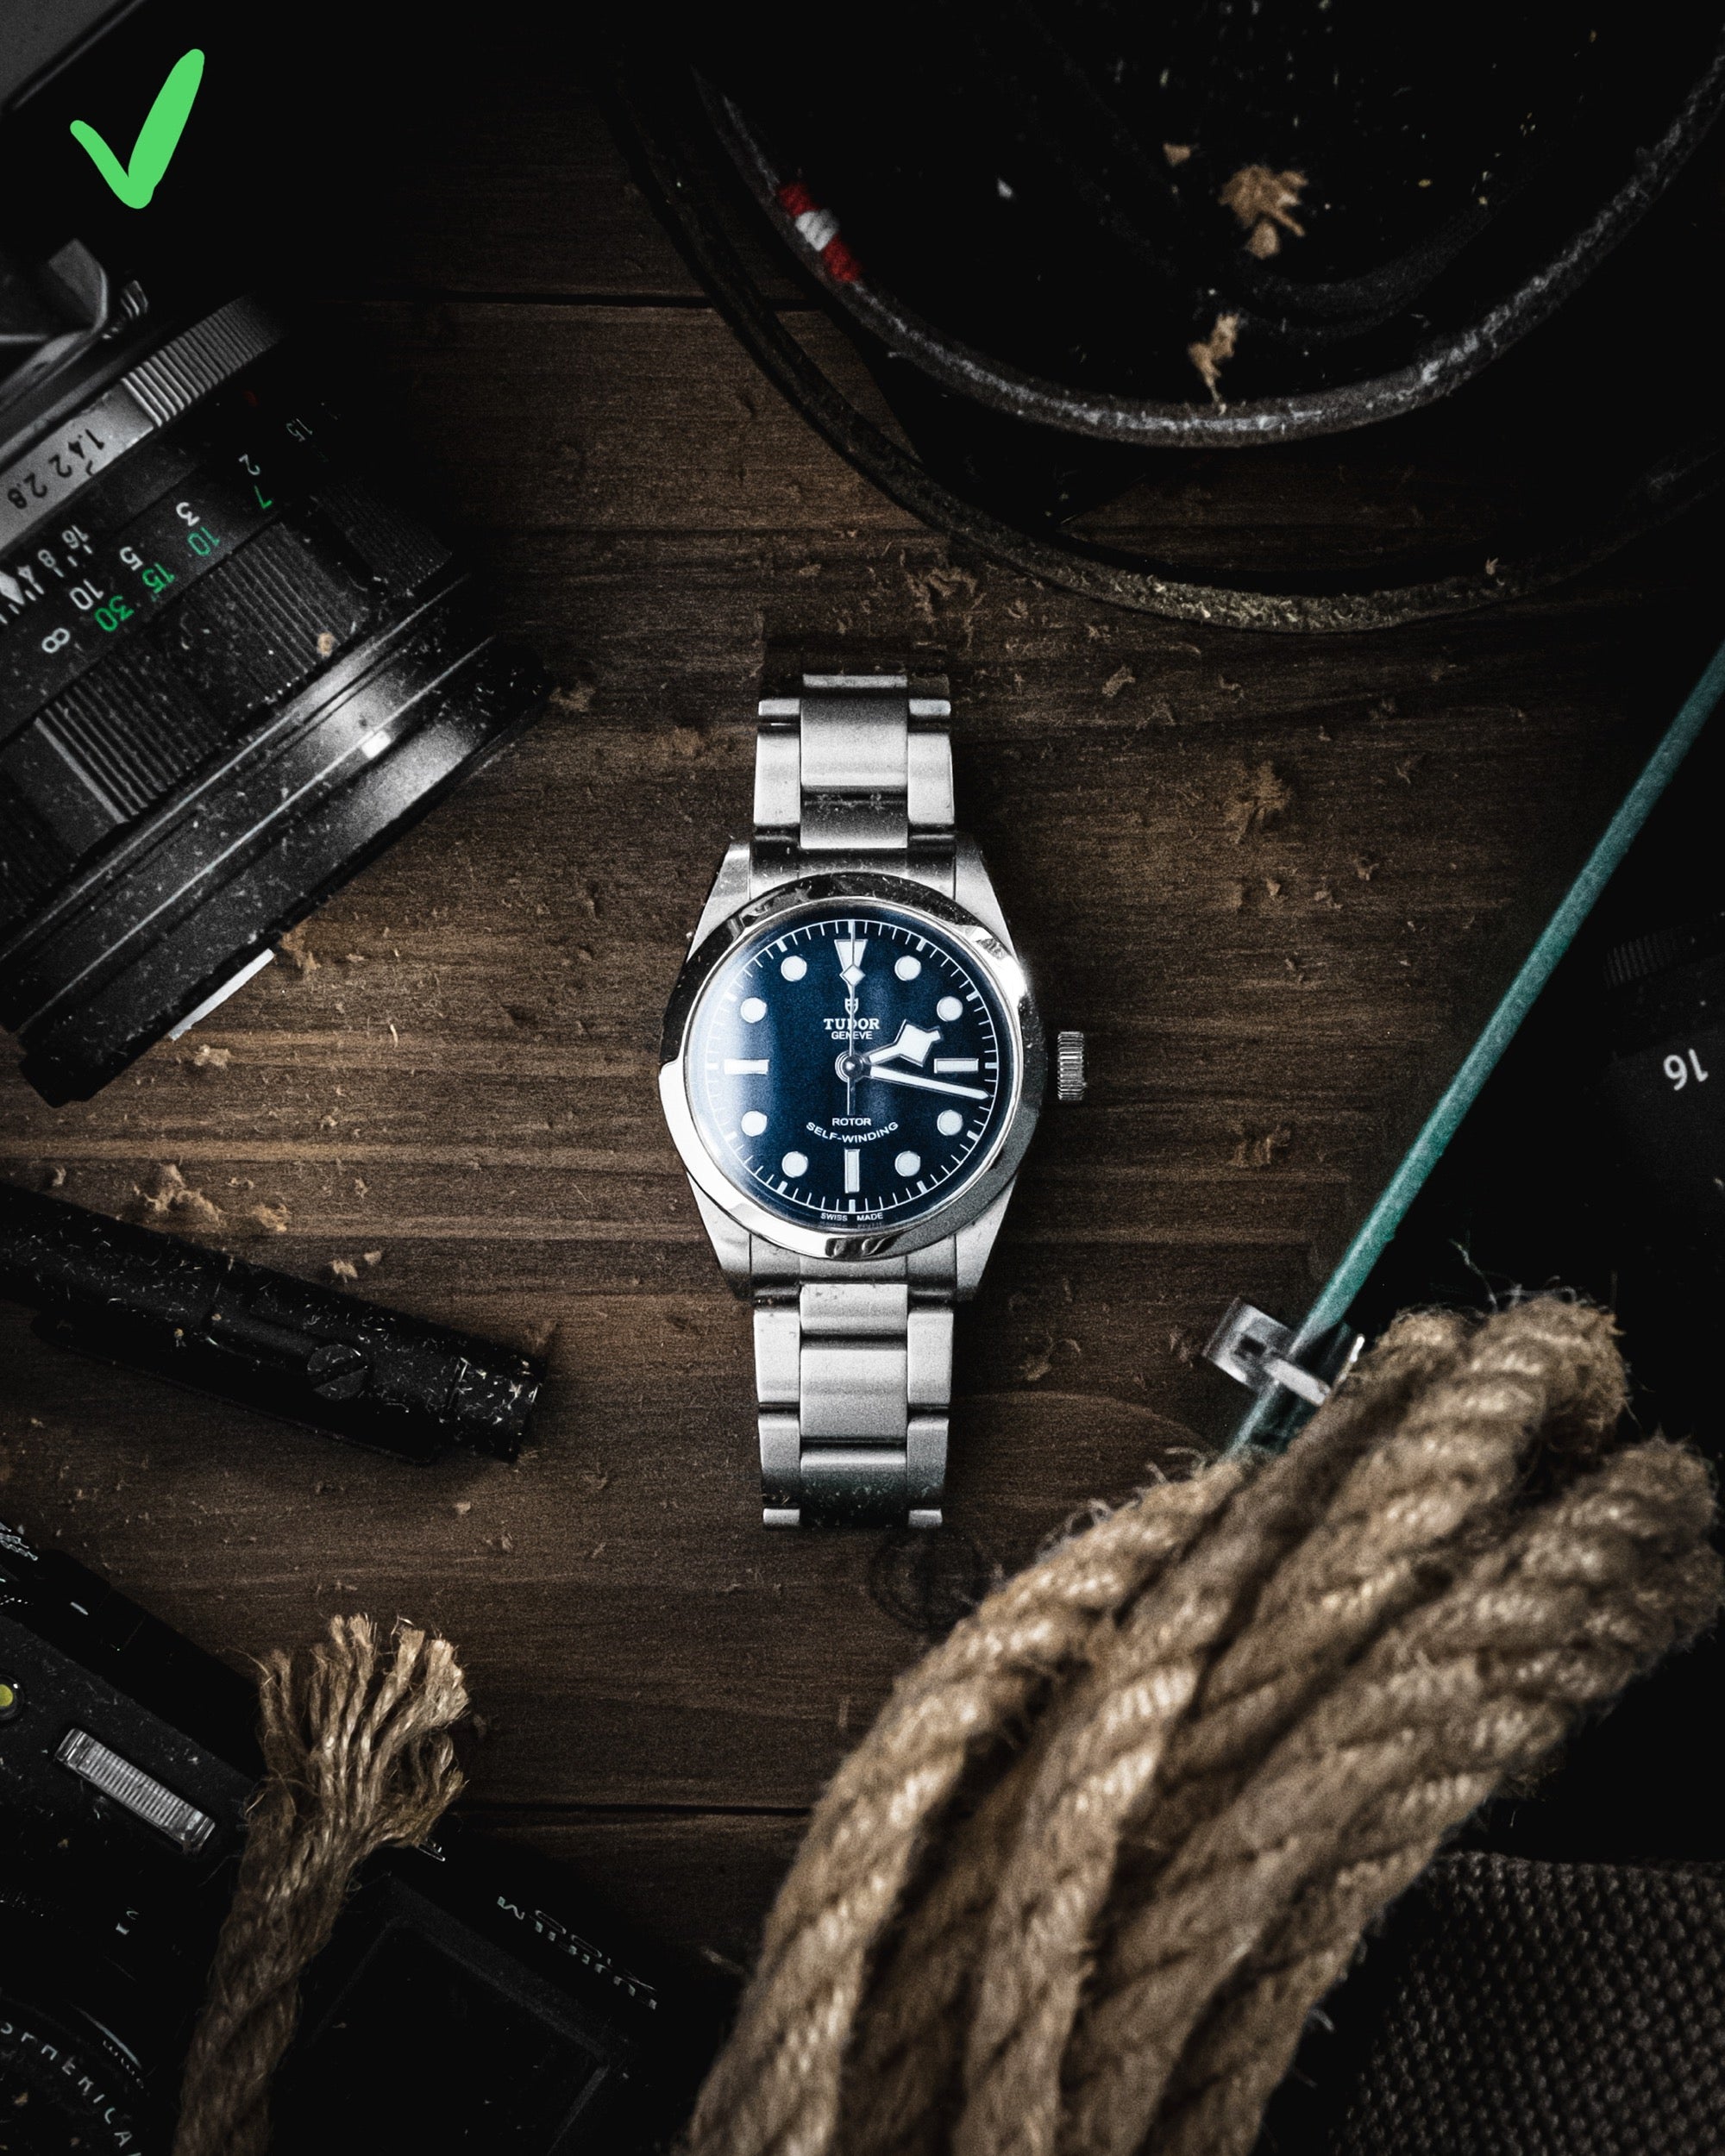 4 lessons on how to properly crop a watch photo